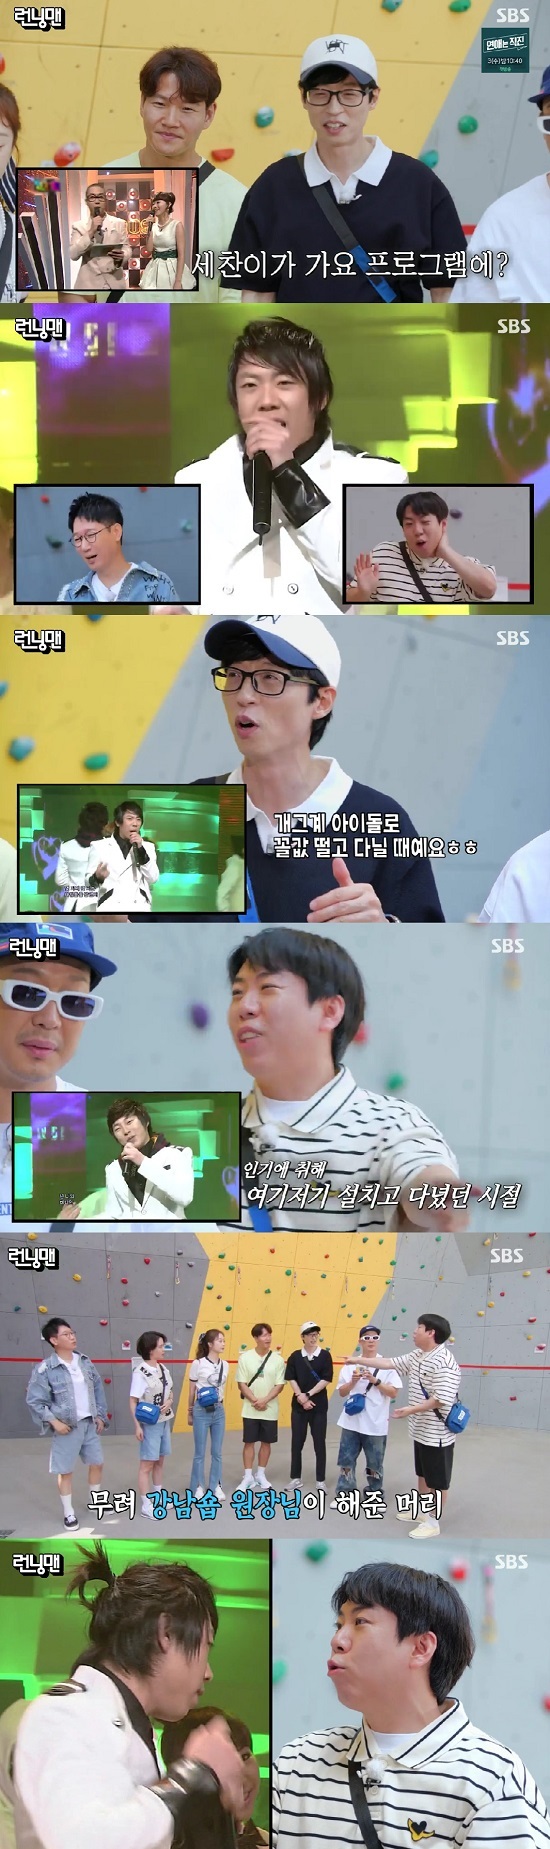 On SBS Running Man broadcast on the 31st, it was featured in the city center Chase, Running Man with tails.On the day of the broadcast, PD said, There is a song that is re-evaluated as a recent masterpiece. Yang Se-chan mentioned that he appeared on music broadcast 14 years ago.So, the data screen was released at the time of appearing on music broadcasting 14 years ago, and Yang Se-chan was greatly embarrassed.Fourteen years ago, Yang Se-chan watched the Singer activity as Woongin and the members laughed when they responded Why are you so serious and I do not want to see you.Yoo Jae-Suk said, To be honest, it is time for the three of them to be popular and to be trembling at that time.Yang Se-chan sympathized with this and laughed, saying, It is time to shake up.Asked by the members, Why is your head like that? Yang Se-chan said, It is the head of the Gangnam shop director.Afterwards, a mission to hide a name tag in Sangam-dong was carried out, and Yang Se-chan expressed confidence that he knew Sangam-dong.Ji Seok-jin headed to the car and laughed at the appearance of not understanding the personal mission rule, saying, Is it all in one car here?Yoo Jae-Suk told PD: Please hit Jeon So-min on SNS, there are some people who have seen it.So you should not be seen by those who see it, he said. Sometimes the investigation is quite . However, PD replied, There is nothing and laughed.Meanwhile, SBS Running Man is broadcast every Sunday at 5 pm.Photo: SBS broadcast screen